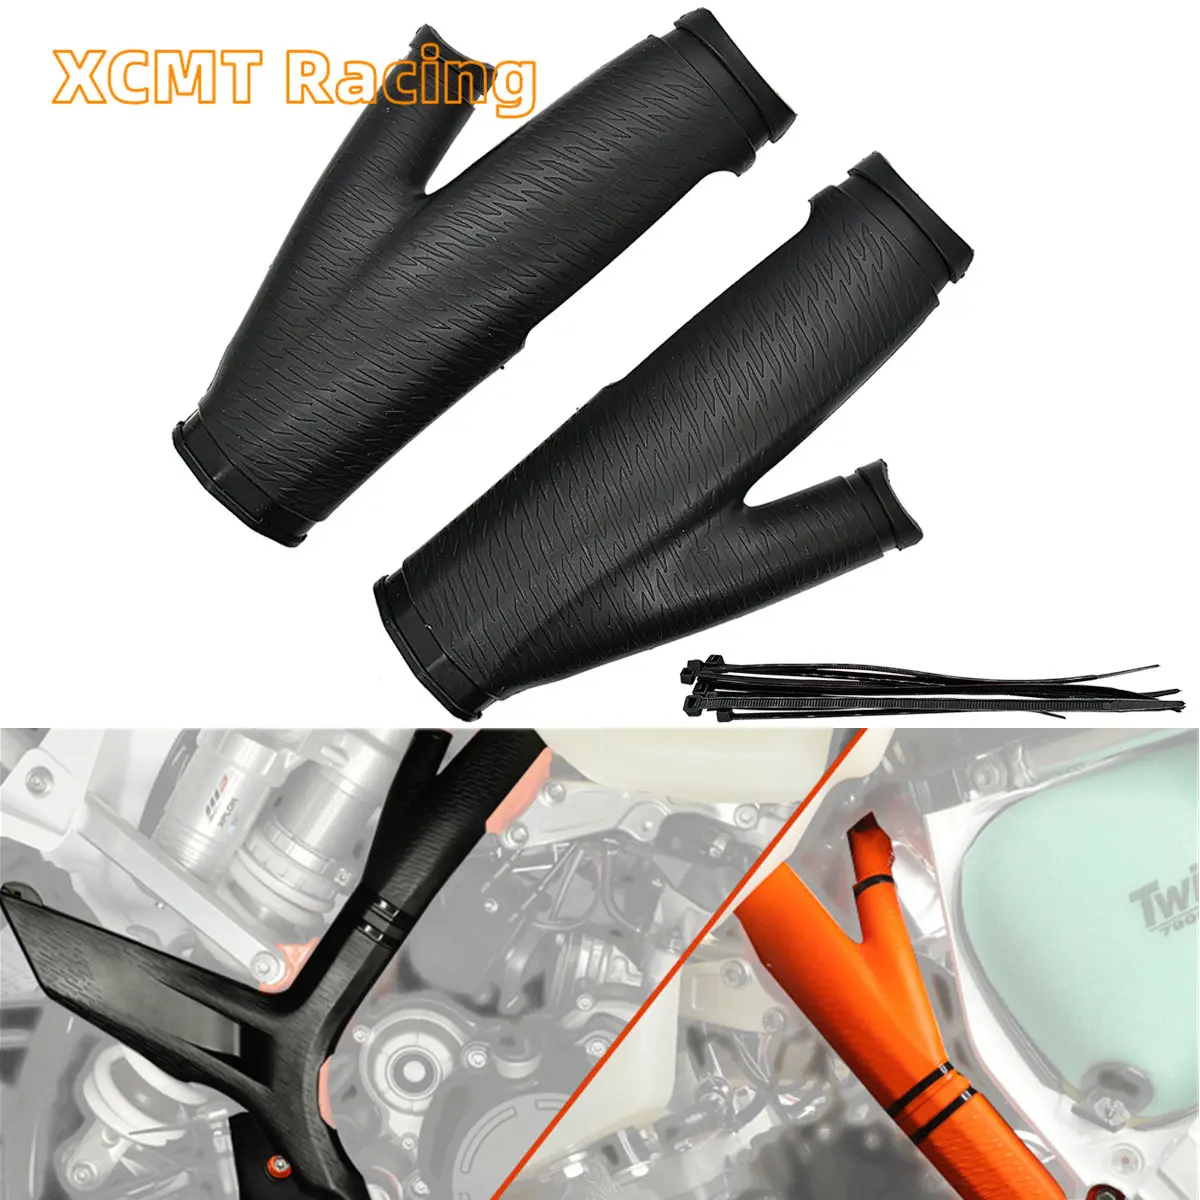 

NEW Motorcycle Plastic Frame Cover Guards Protector For KTM SX SXF XC XCF EXC EXCF 125 150 250 300 350 450 500 2019-2023